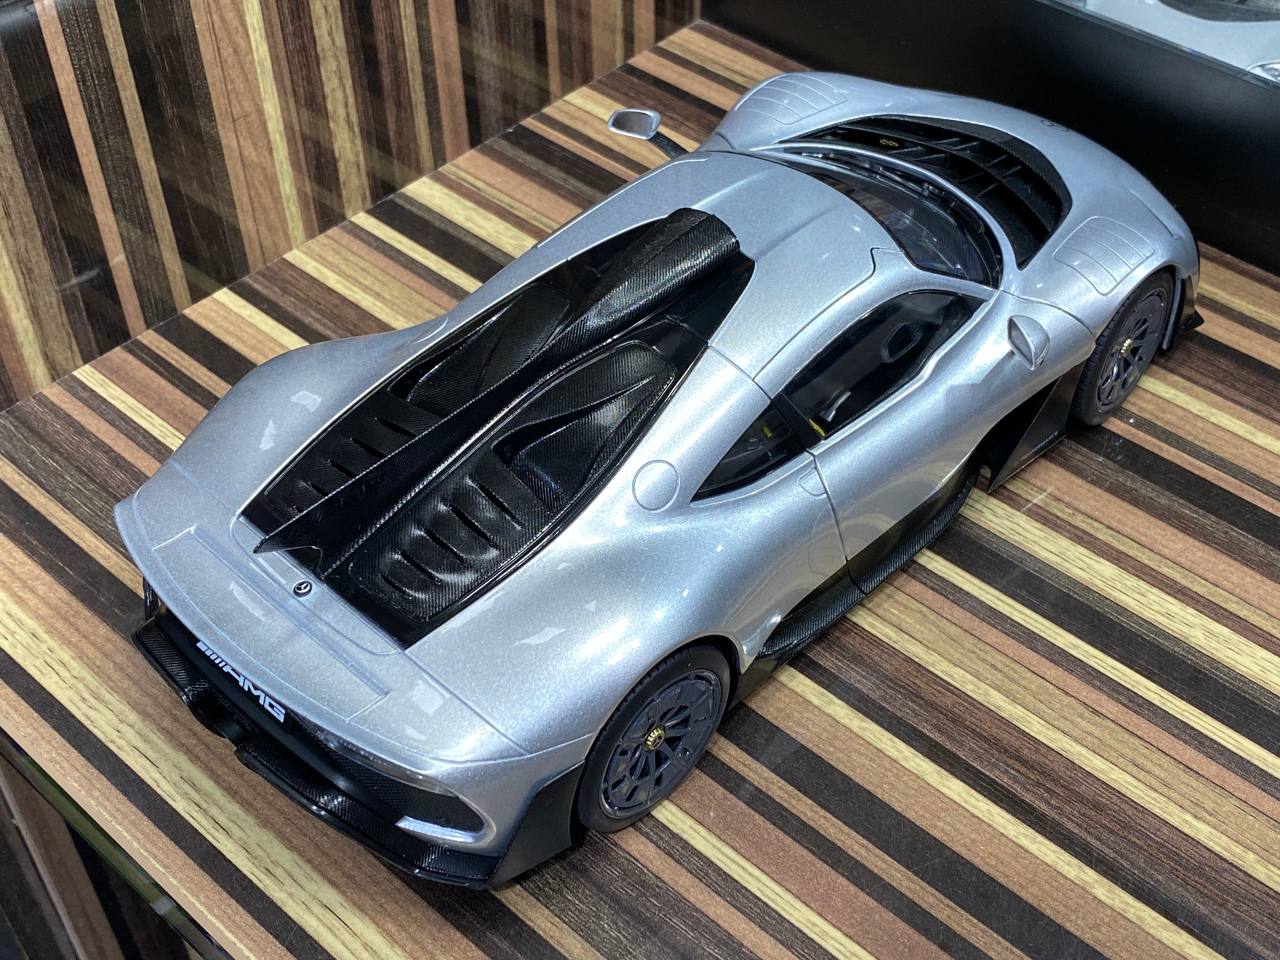 Mercedes Benz Amg One Dealer Edition Silver by Mini Champs|Sold in Dturman.com Dubai UAE.